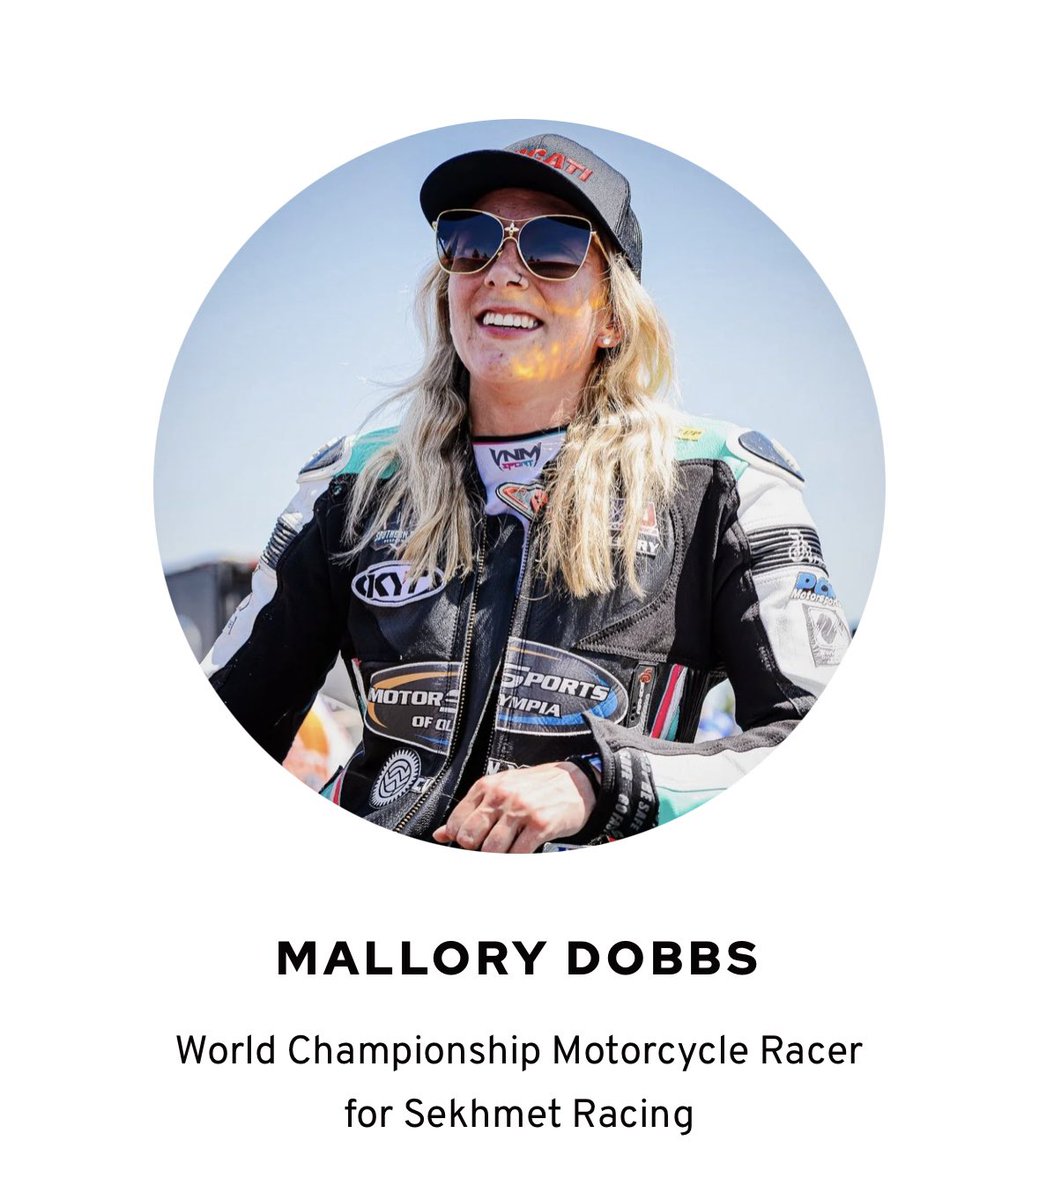 When @sportsilab calls, you answer! And we’re stoked to be sending @Mallory126 to speak this Friday at the Women’s Sports Club in NYC with a mega line up of female talent in the sport & media world. You can see the full agenda below 👇 sportsilab.com/womens-sports-… #SekhmetRacing